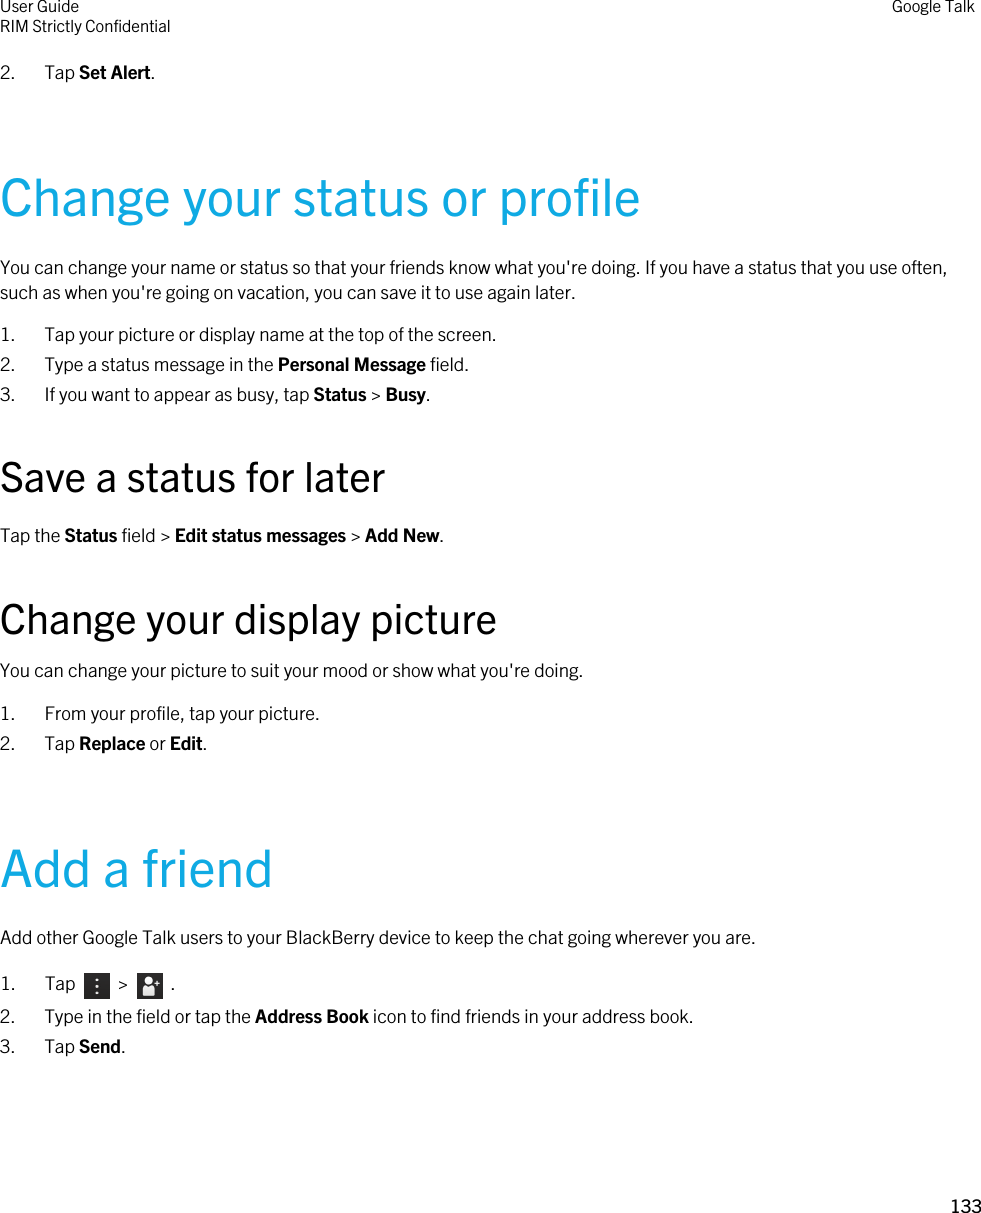 2. Tap Set Alert.Change your status or profileYou can change your name or status so that your friends know what you&apos;re doing. If you have a status that you use often, such as when you&apos;re going on vacation, you can save it to use again later.1. Tap your picture or display name at the top of the screen.2. Type a status message in the Personal Message field.3. If you want to appear as busy, tap Status &gt; Busy.Save a status for laterTap the Status field &gt; Edit status messages &gt; Add New.Change your display pictureYou can change your picture to suit your mood or show what you&apos;re doing.1. From your profile, tap your picture.2. Tap Replace or Edit.Add a friendAdd other Google Talk users to your BlackBerry device to keep the chat going wherever you are.1.  Tap     &gt;    .2. Type in the field or tap the Address Book icon to find friends in your address book.3. Tap Send.User GuideRIM Strictly ConfidentialGoogle Talk133 